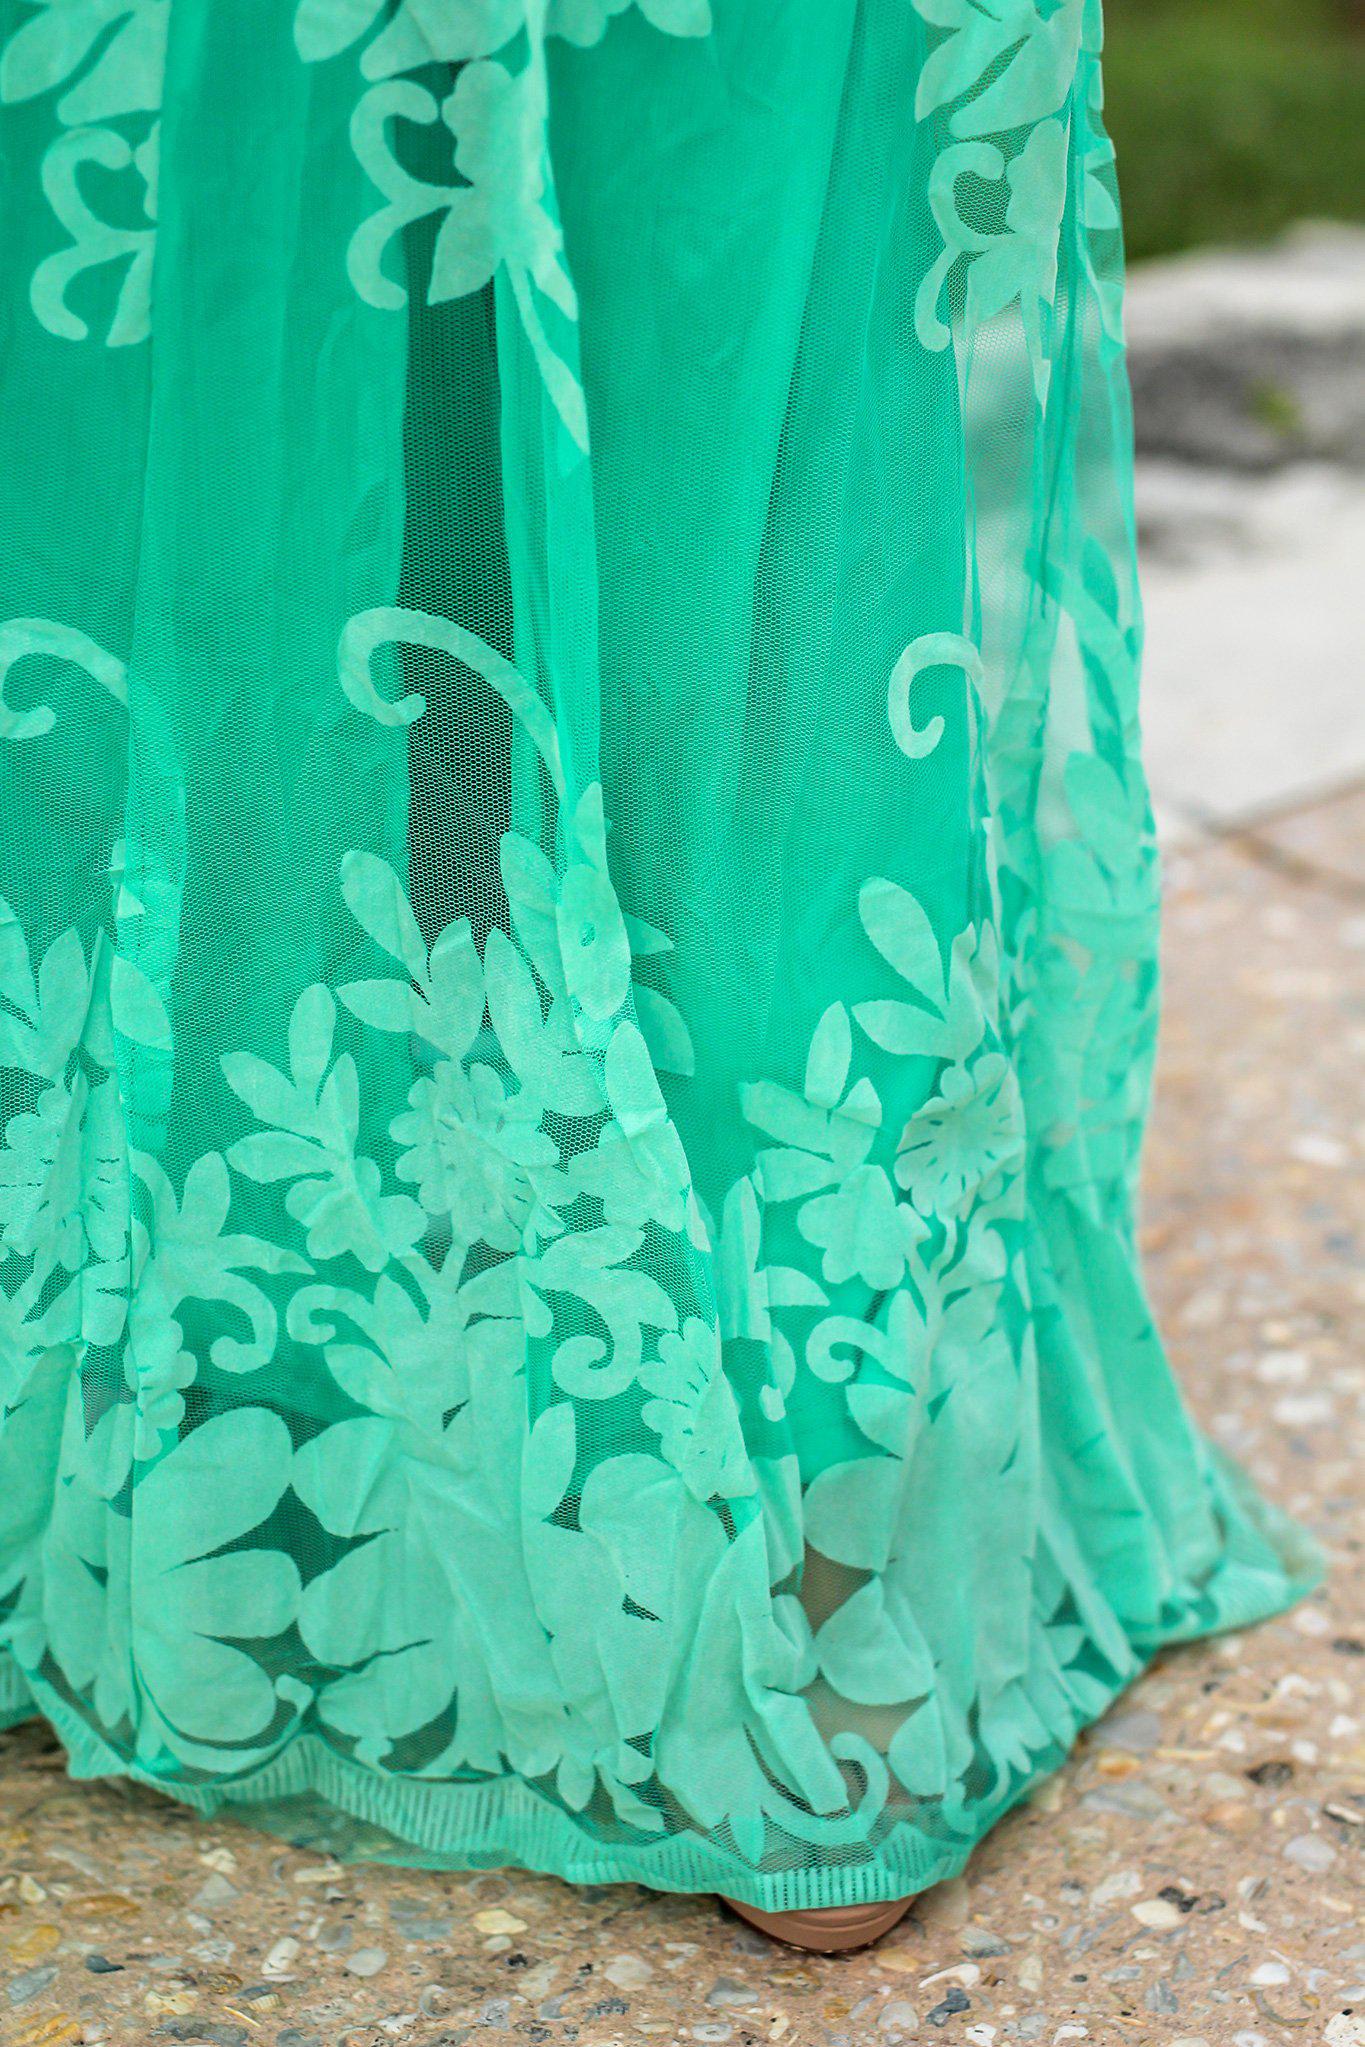 Turquoise Floral Tulle Maxi Dress with Criss Cross Back